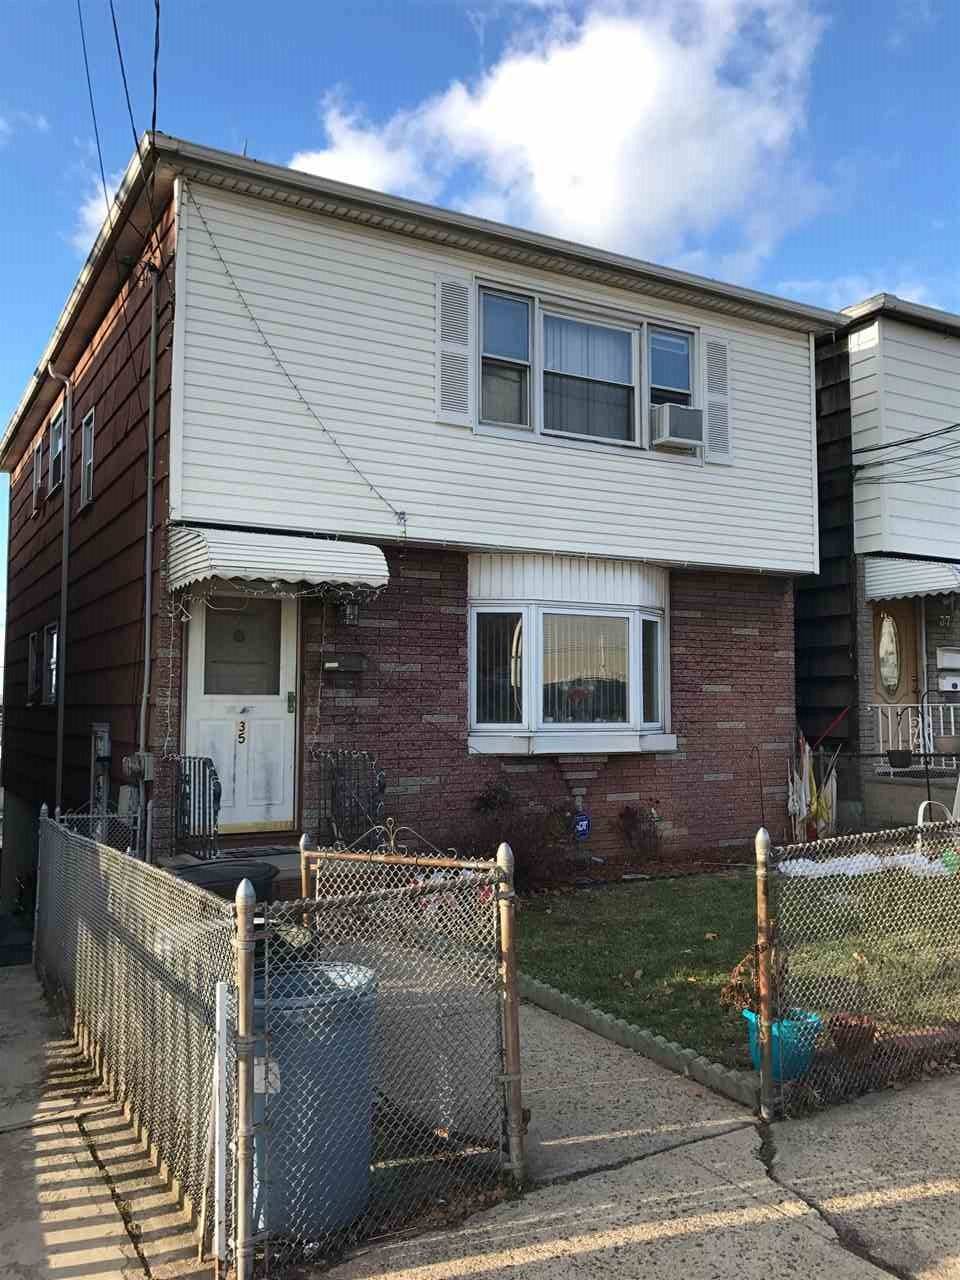 Income producing 2 family with finished basement The 1st unit is the perfect mother-daughter situation